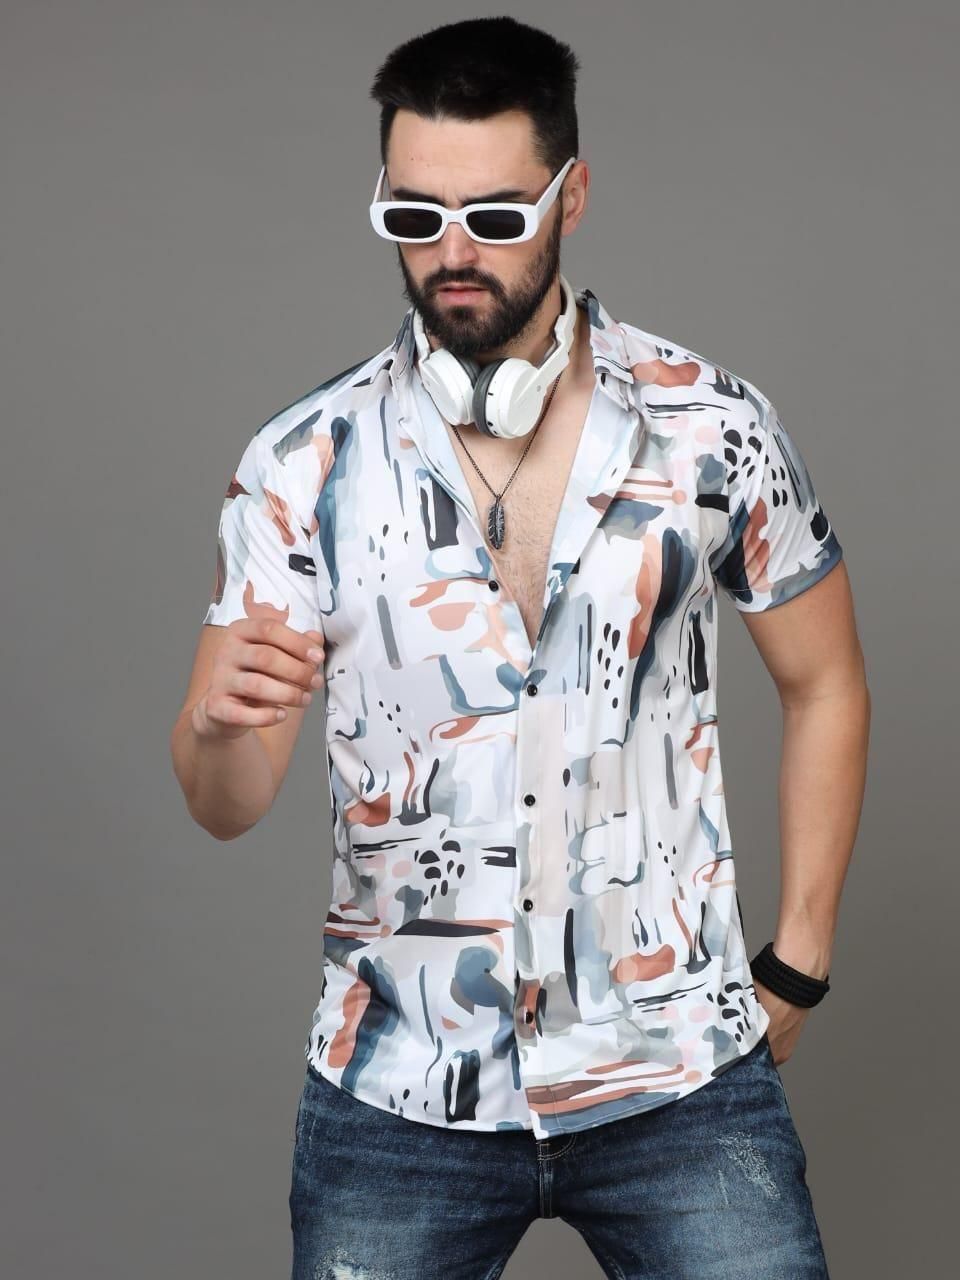 Men's Half-Sleeve Shirt with Printed Design Crafted from Lightweight Rayon Fabric